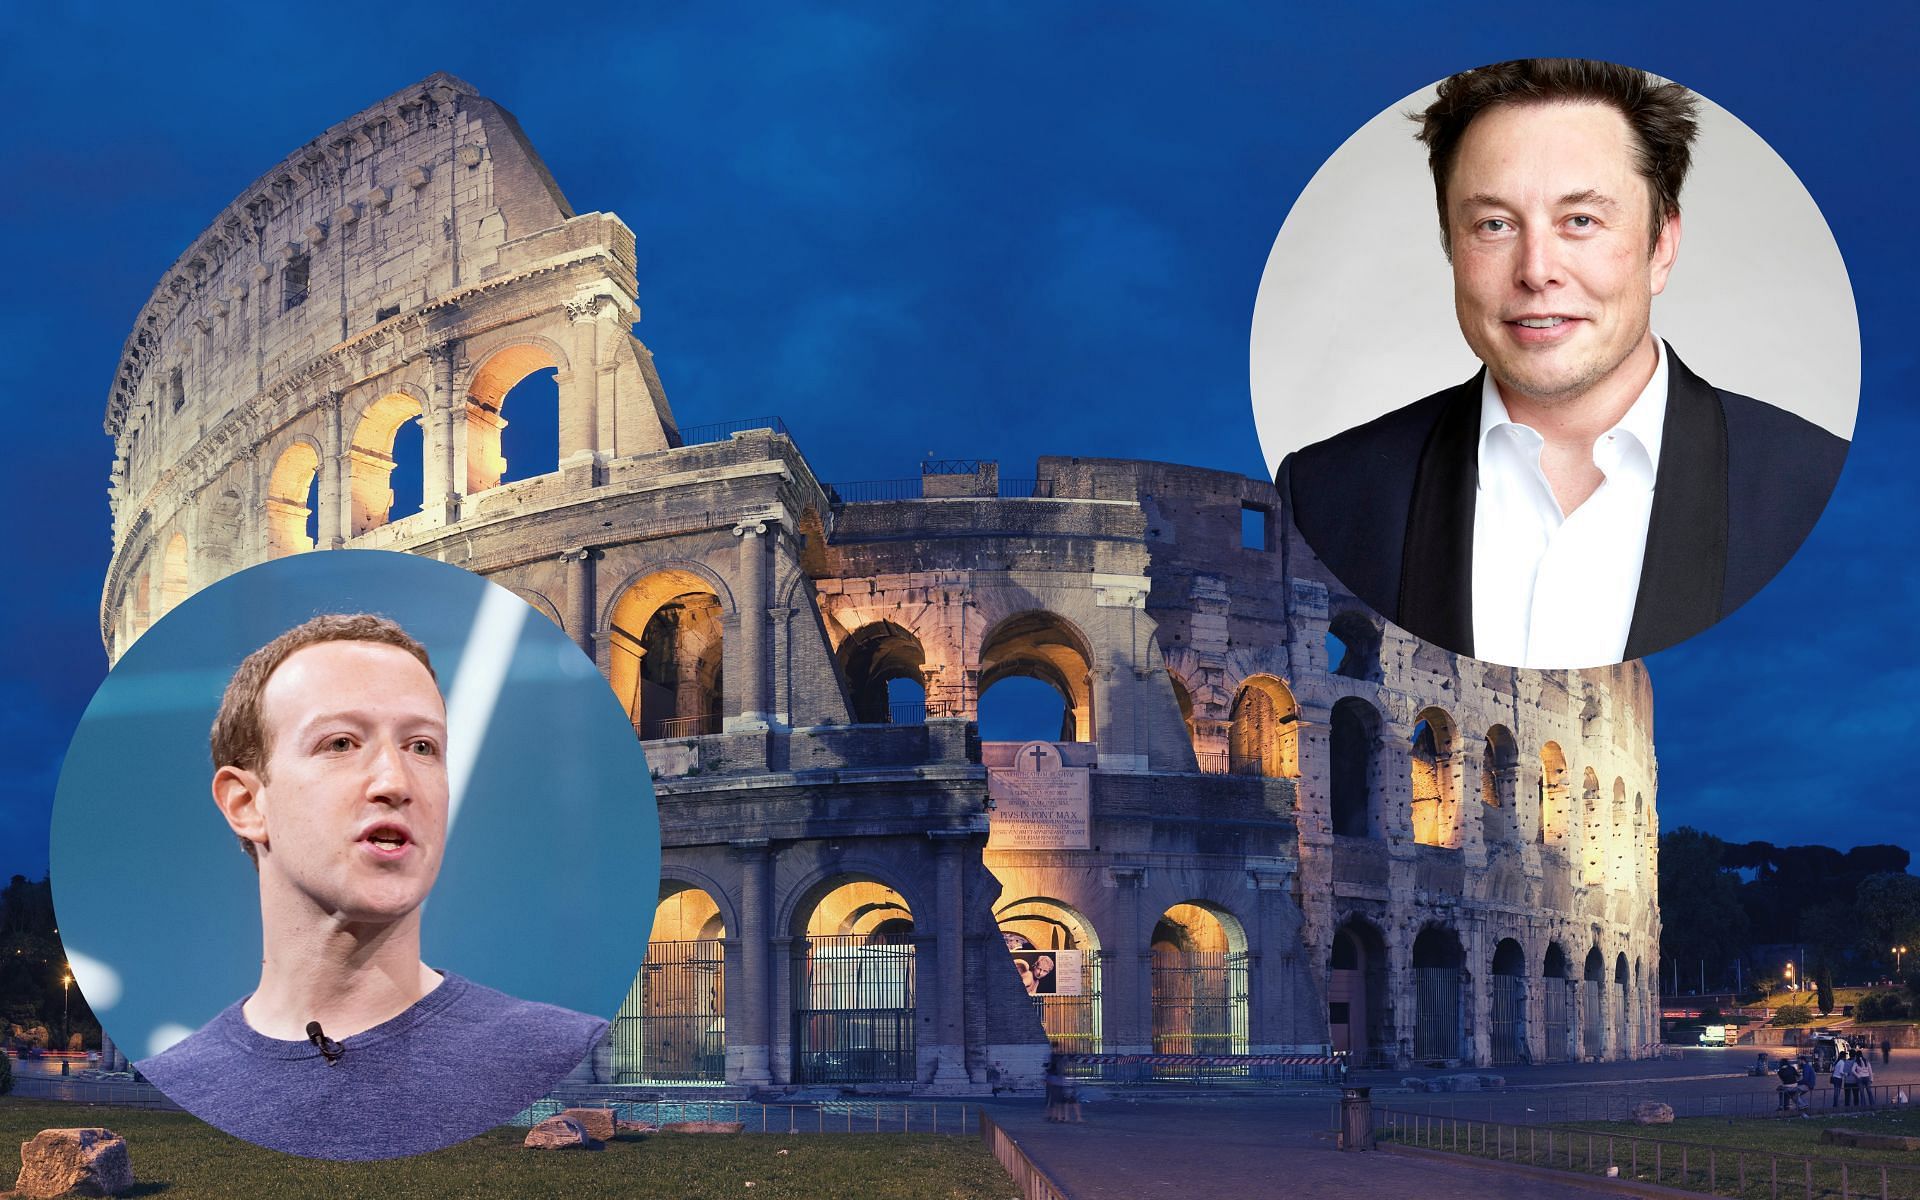 Mark Zuckerberg and Elon Musk agree to fight in the Colosseum [Images via Wikimedia Commons]